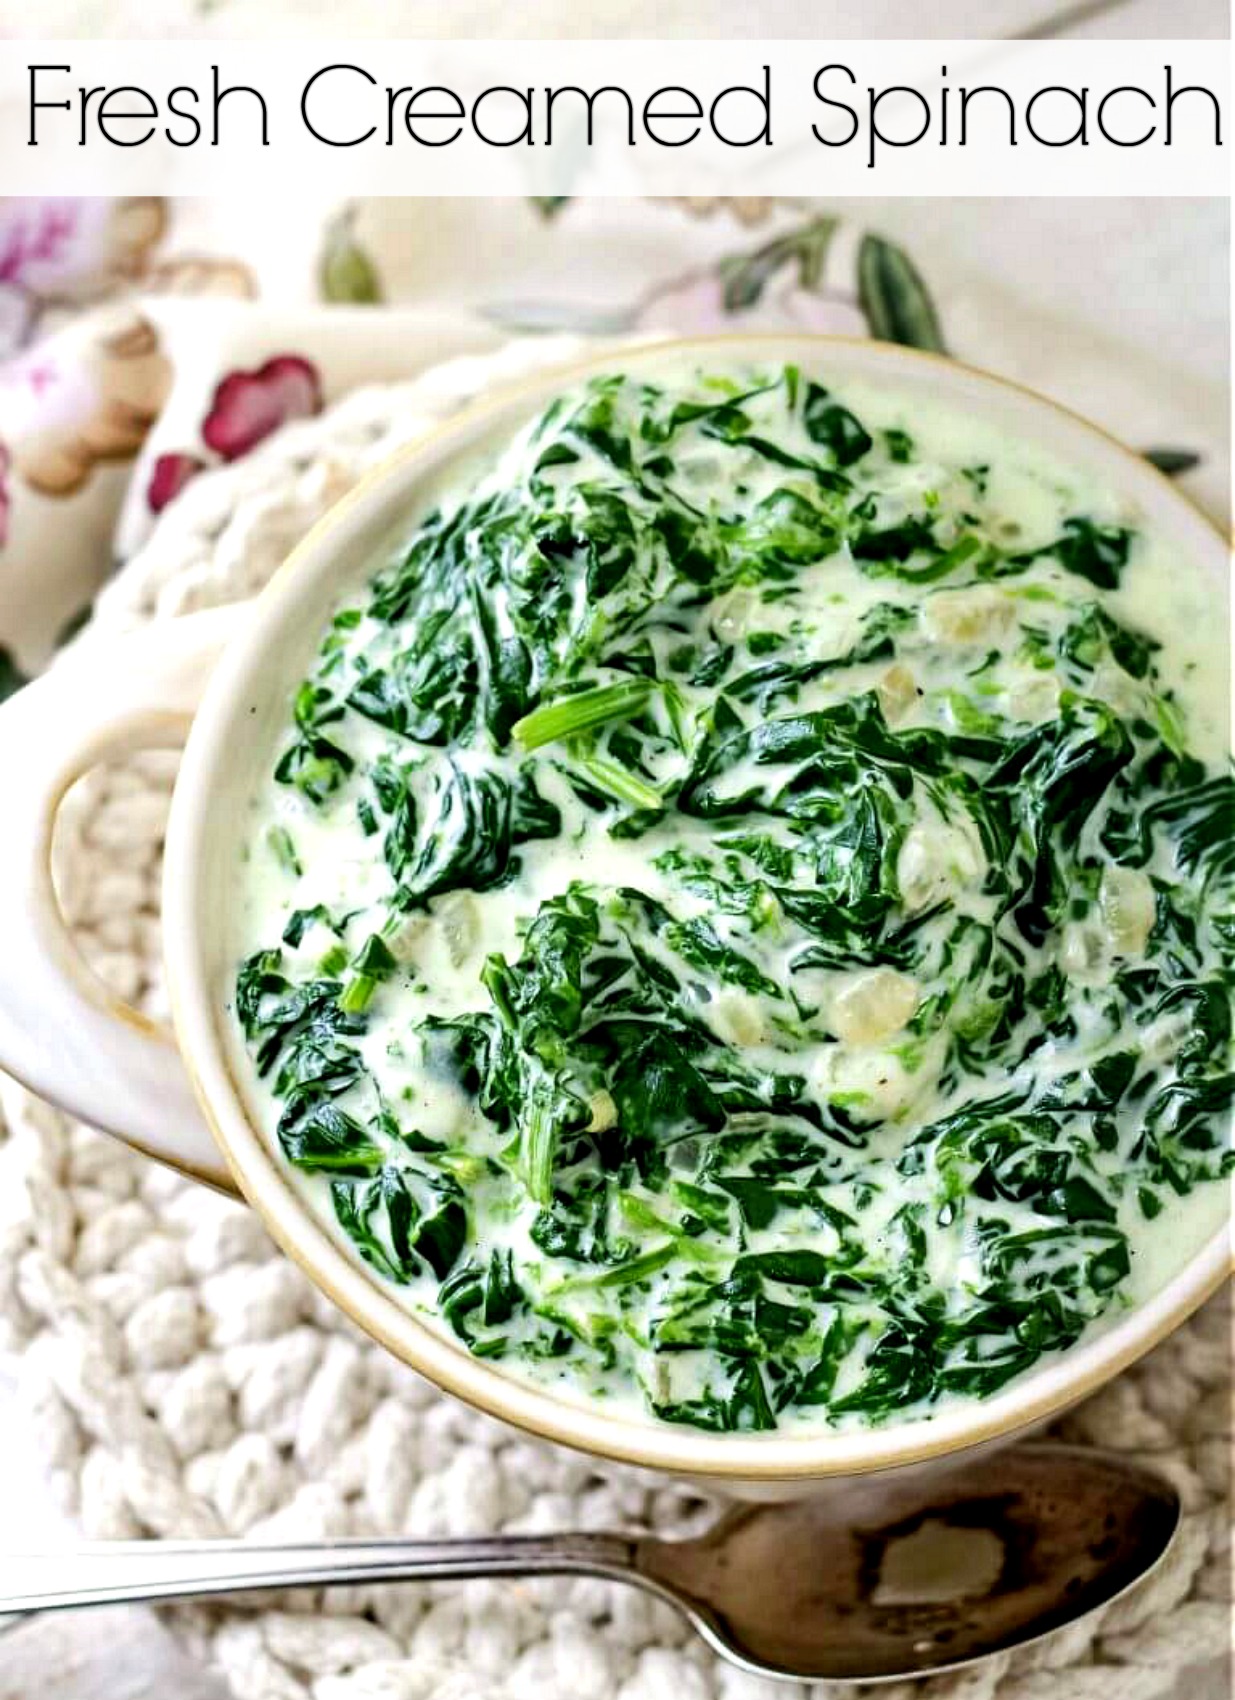 Fresh Creamed Spinach - Bunny's Warm Oven